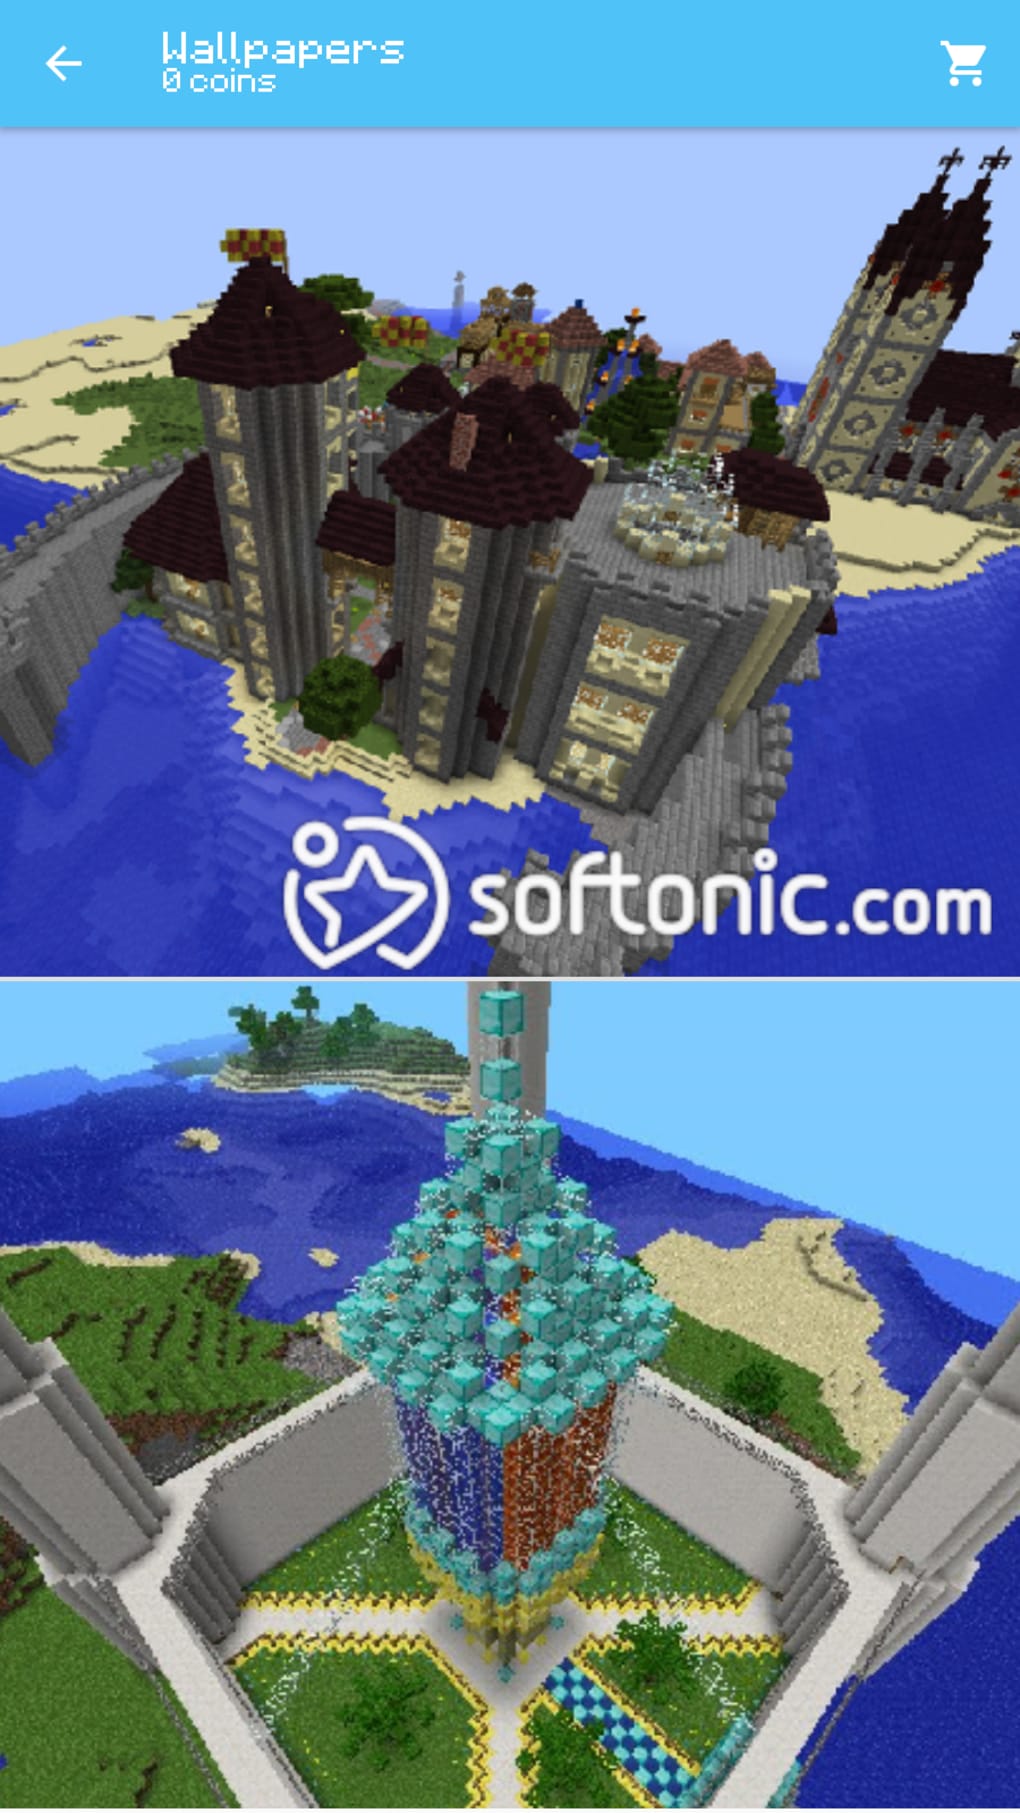 softonic games download for android